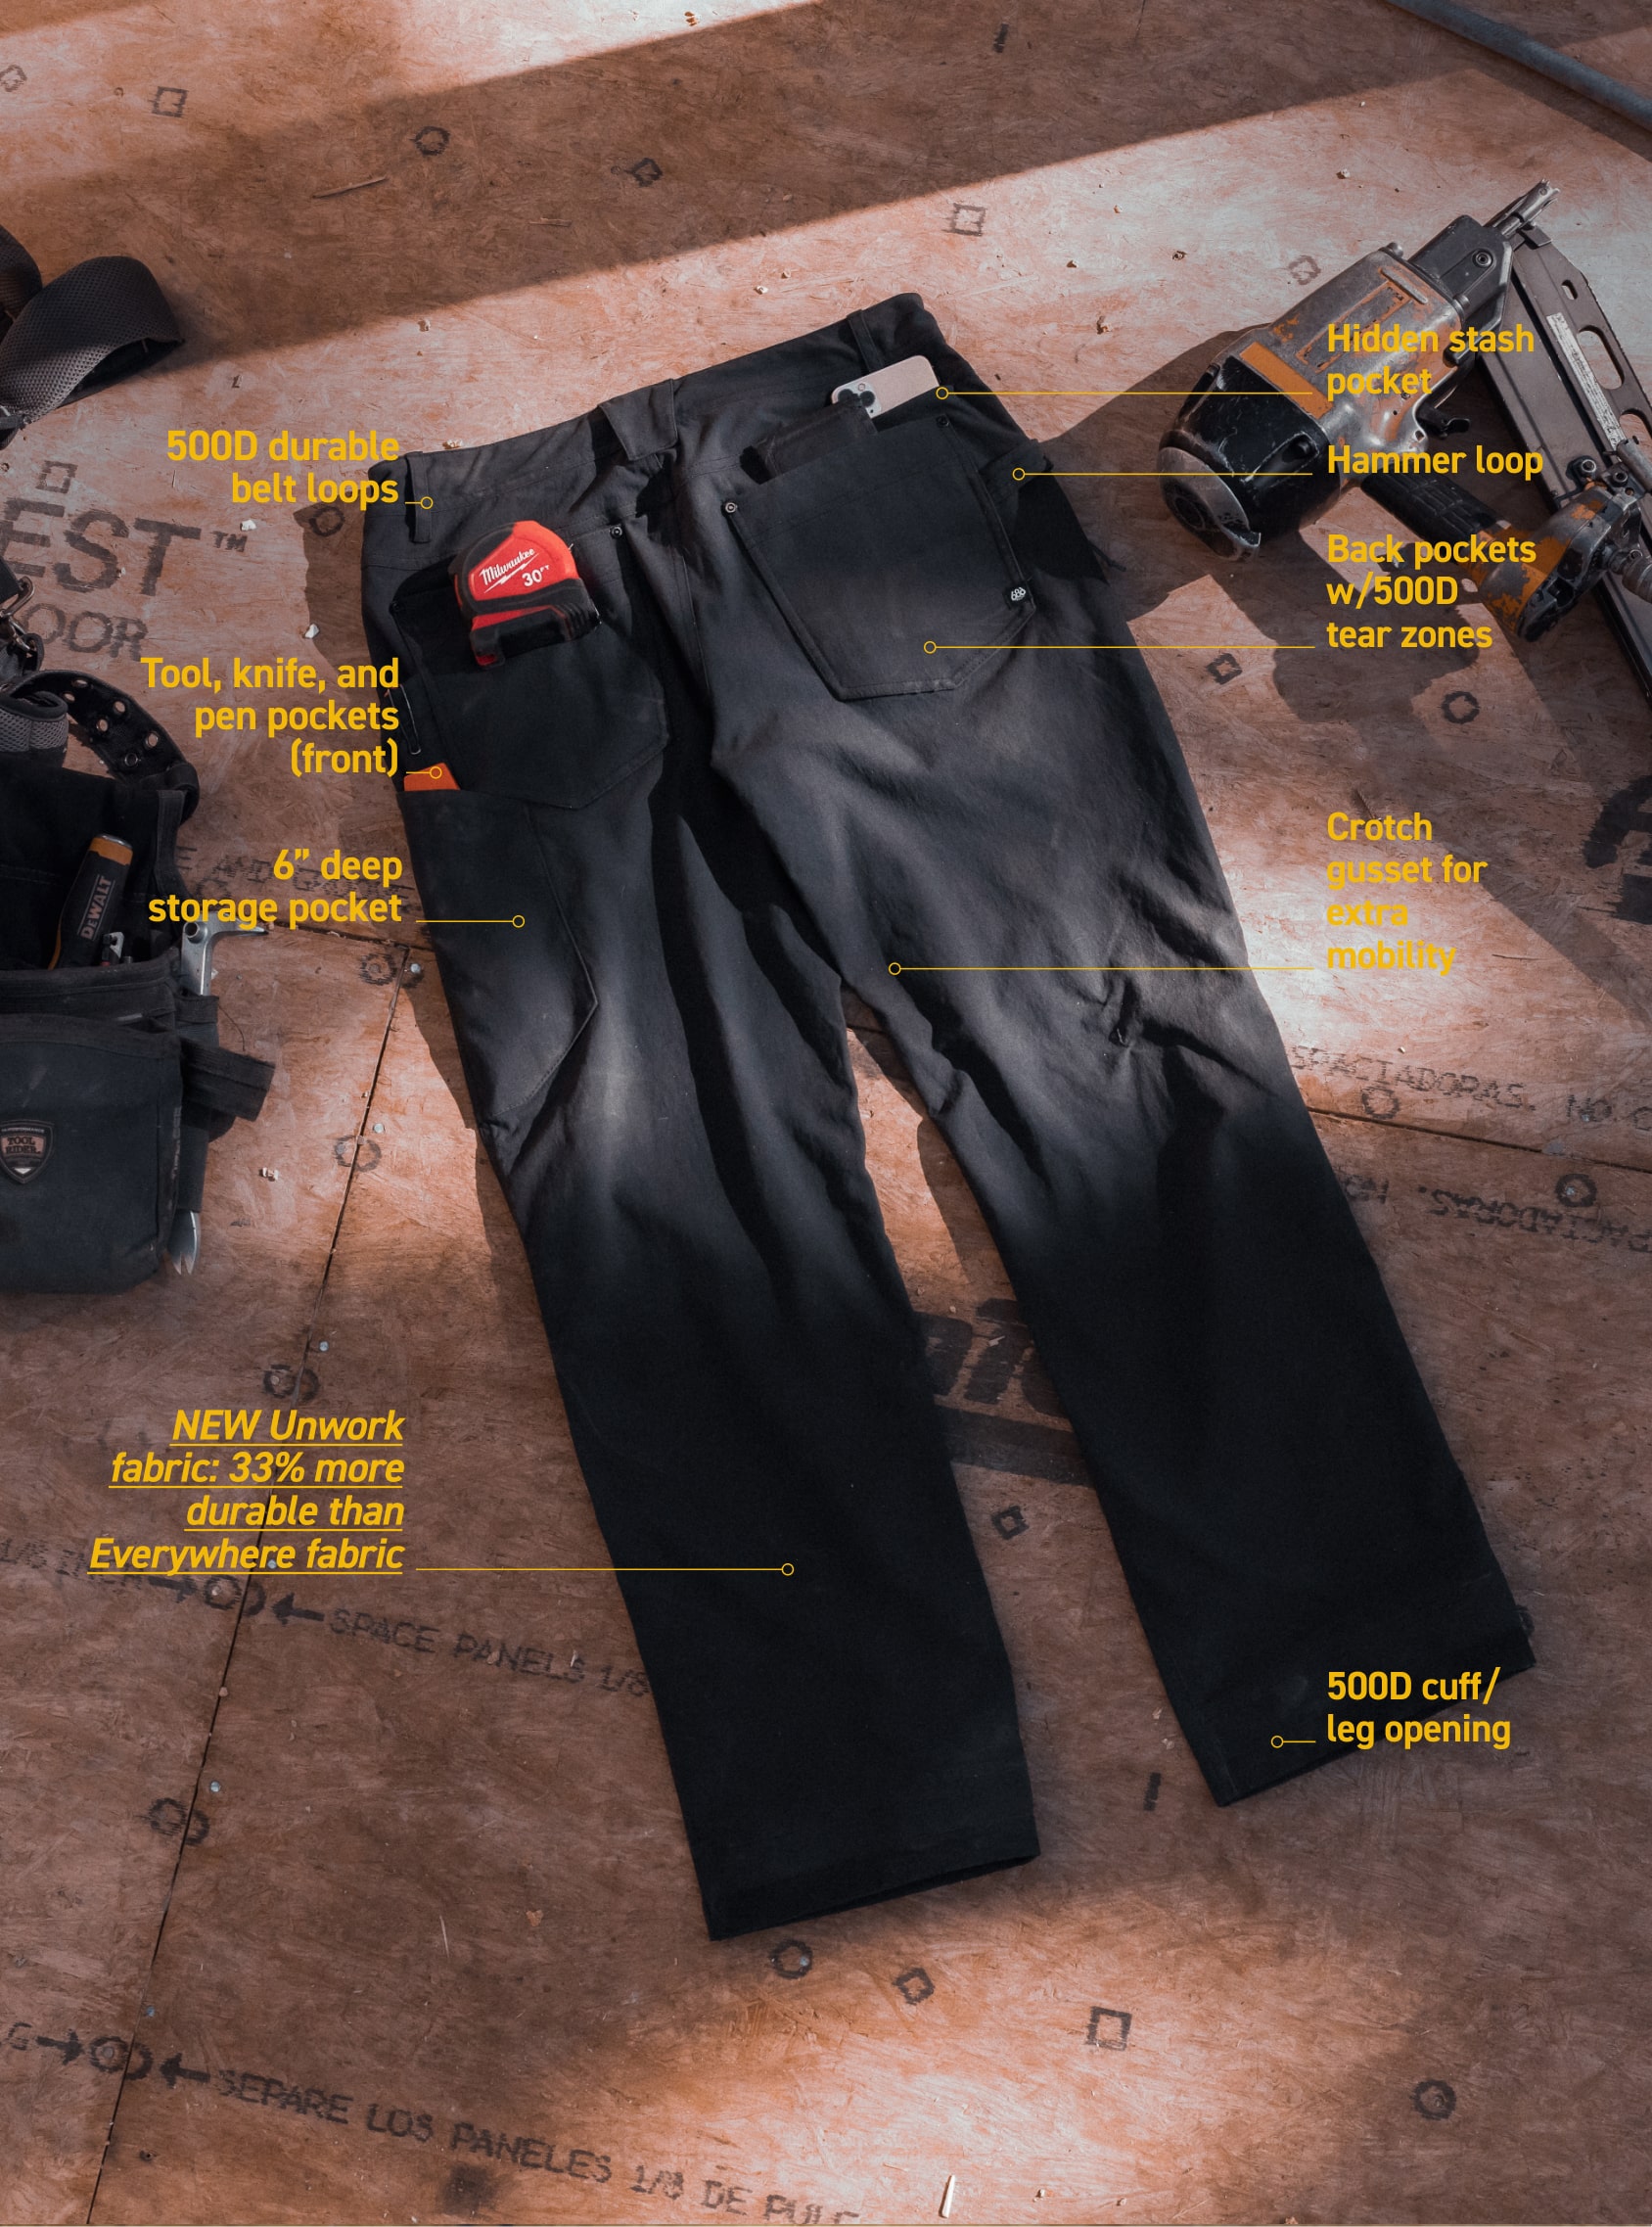 Abrasion-Resistant Relaxed Fit Work Pants For Men — Ono Work & Safety